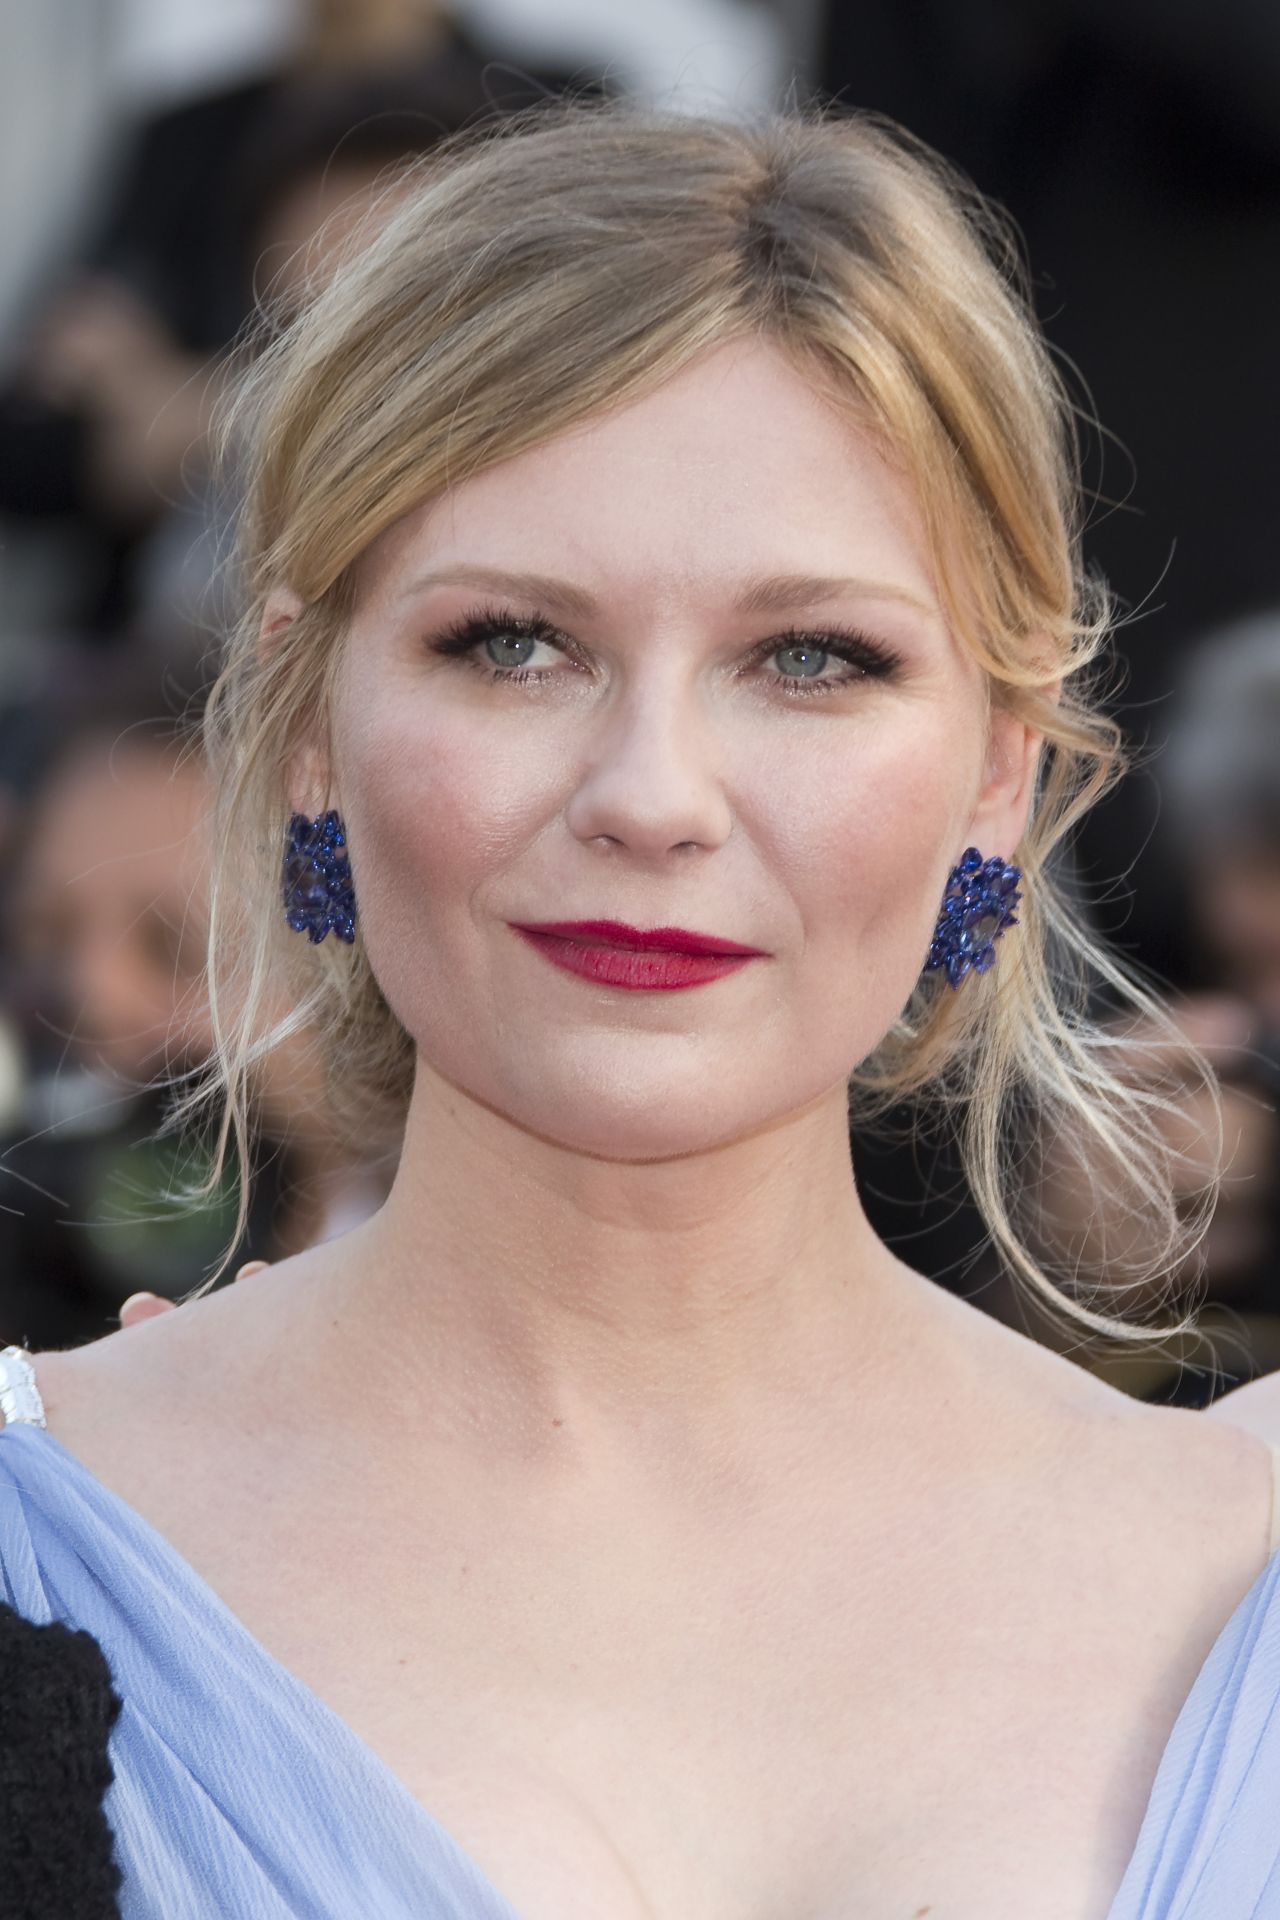 Kirsten Dunst at “The Beguiled” World Premiere Cannes Film Festival